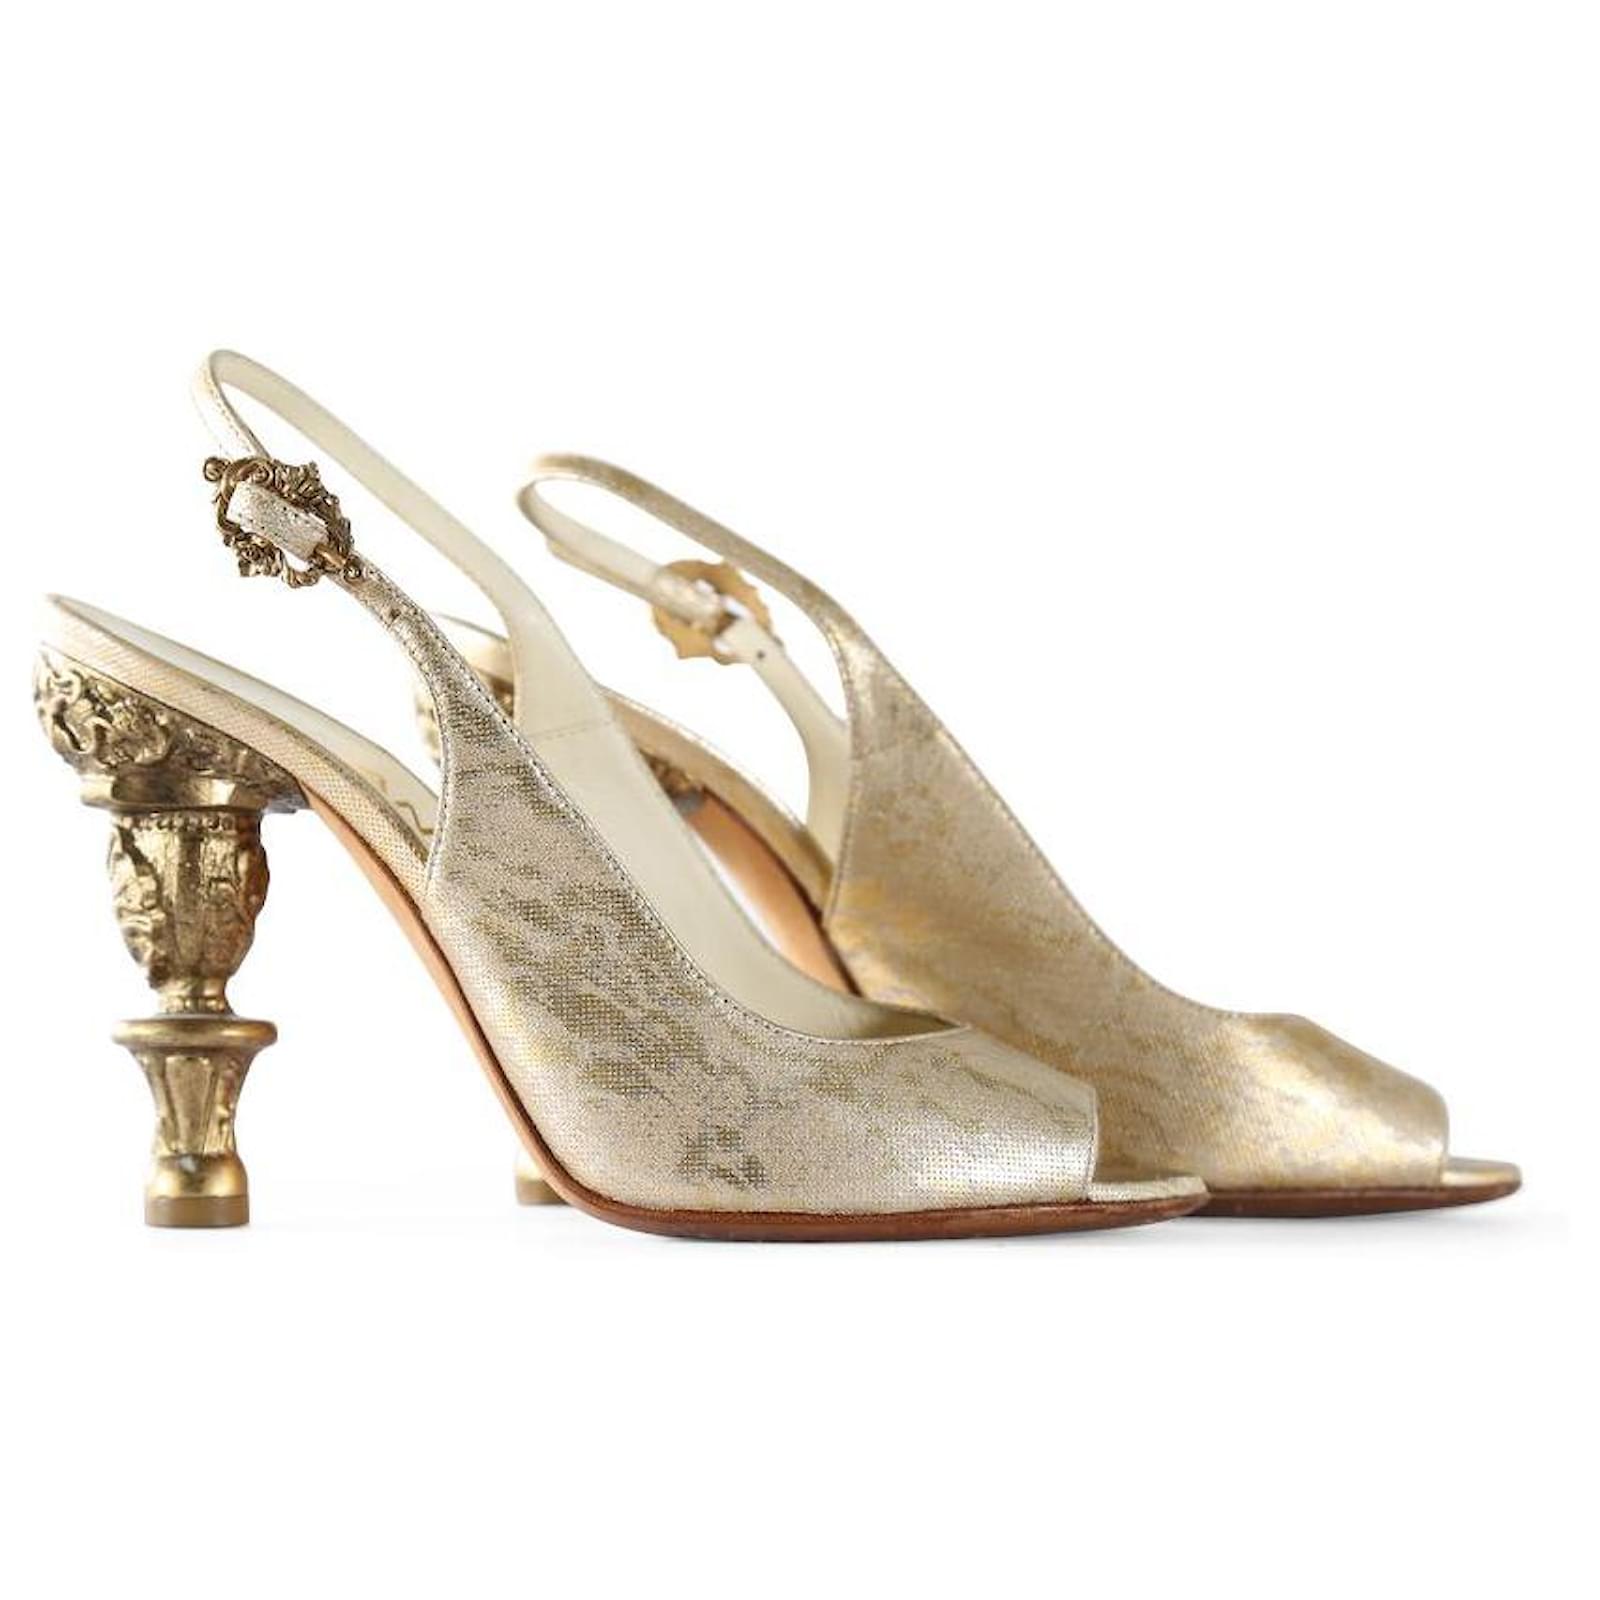 Chanel Gold Leather Open Toe Slingback Baroque Heel Sandals